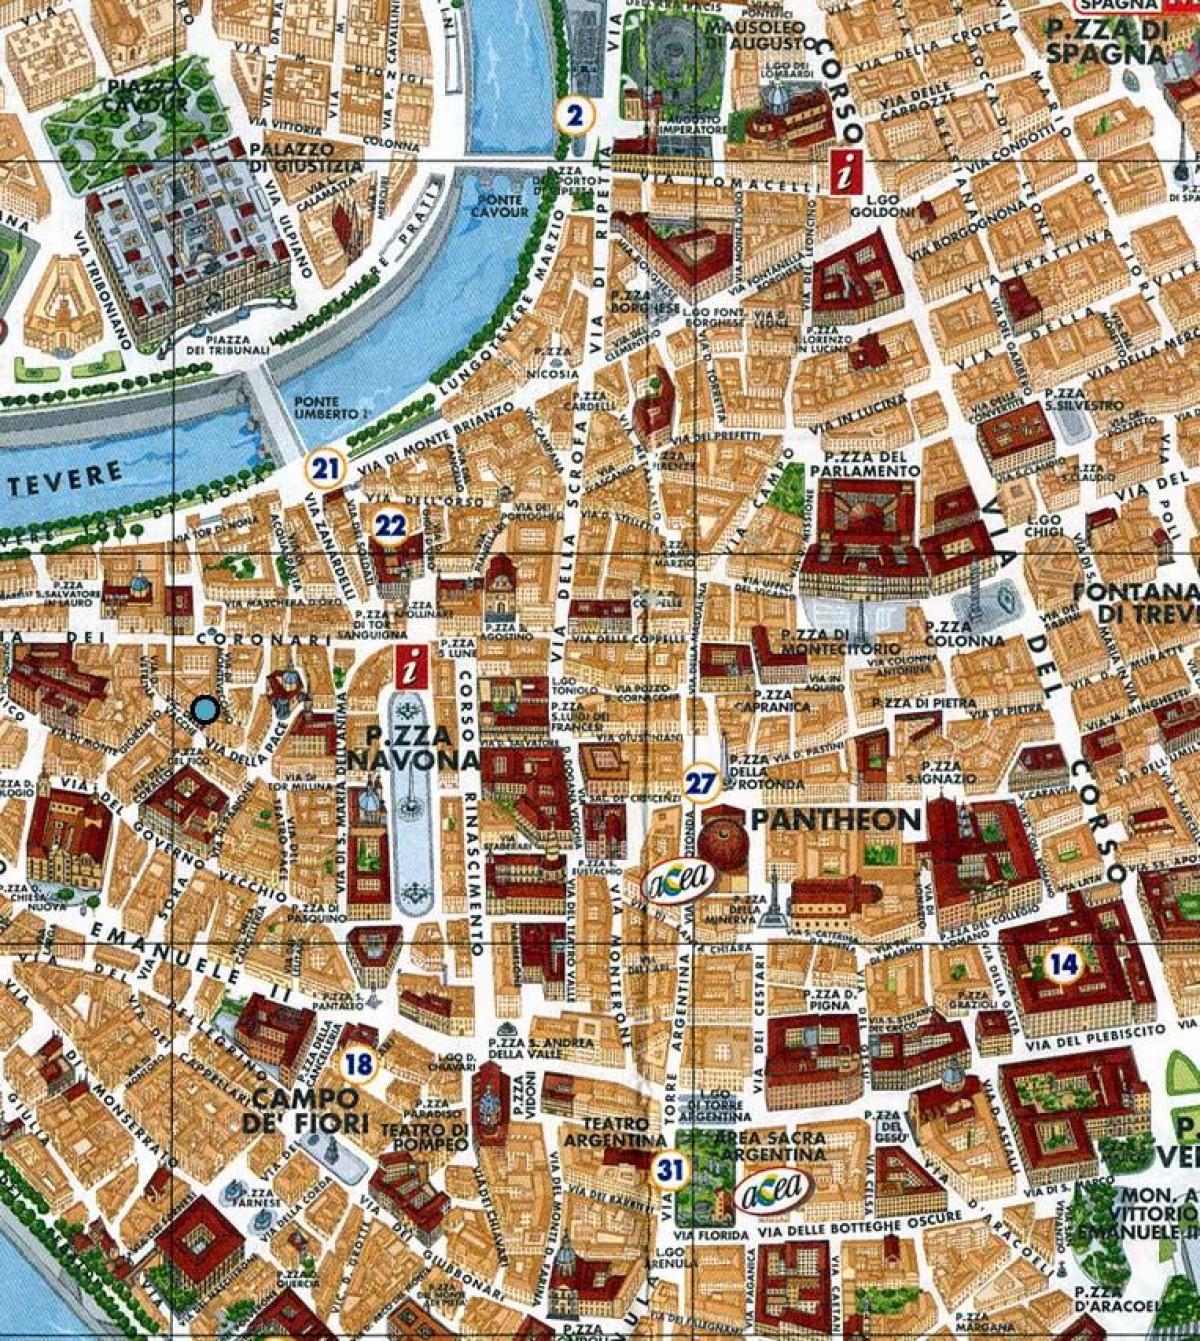 map of Rome piazza navona